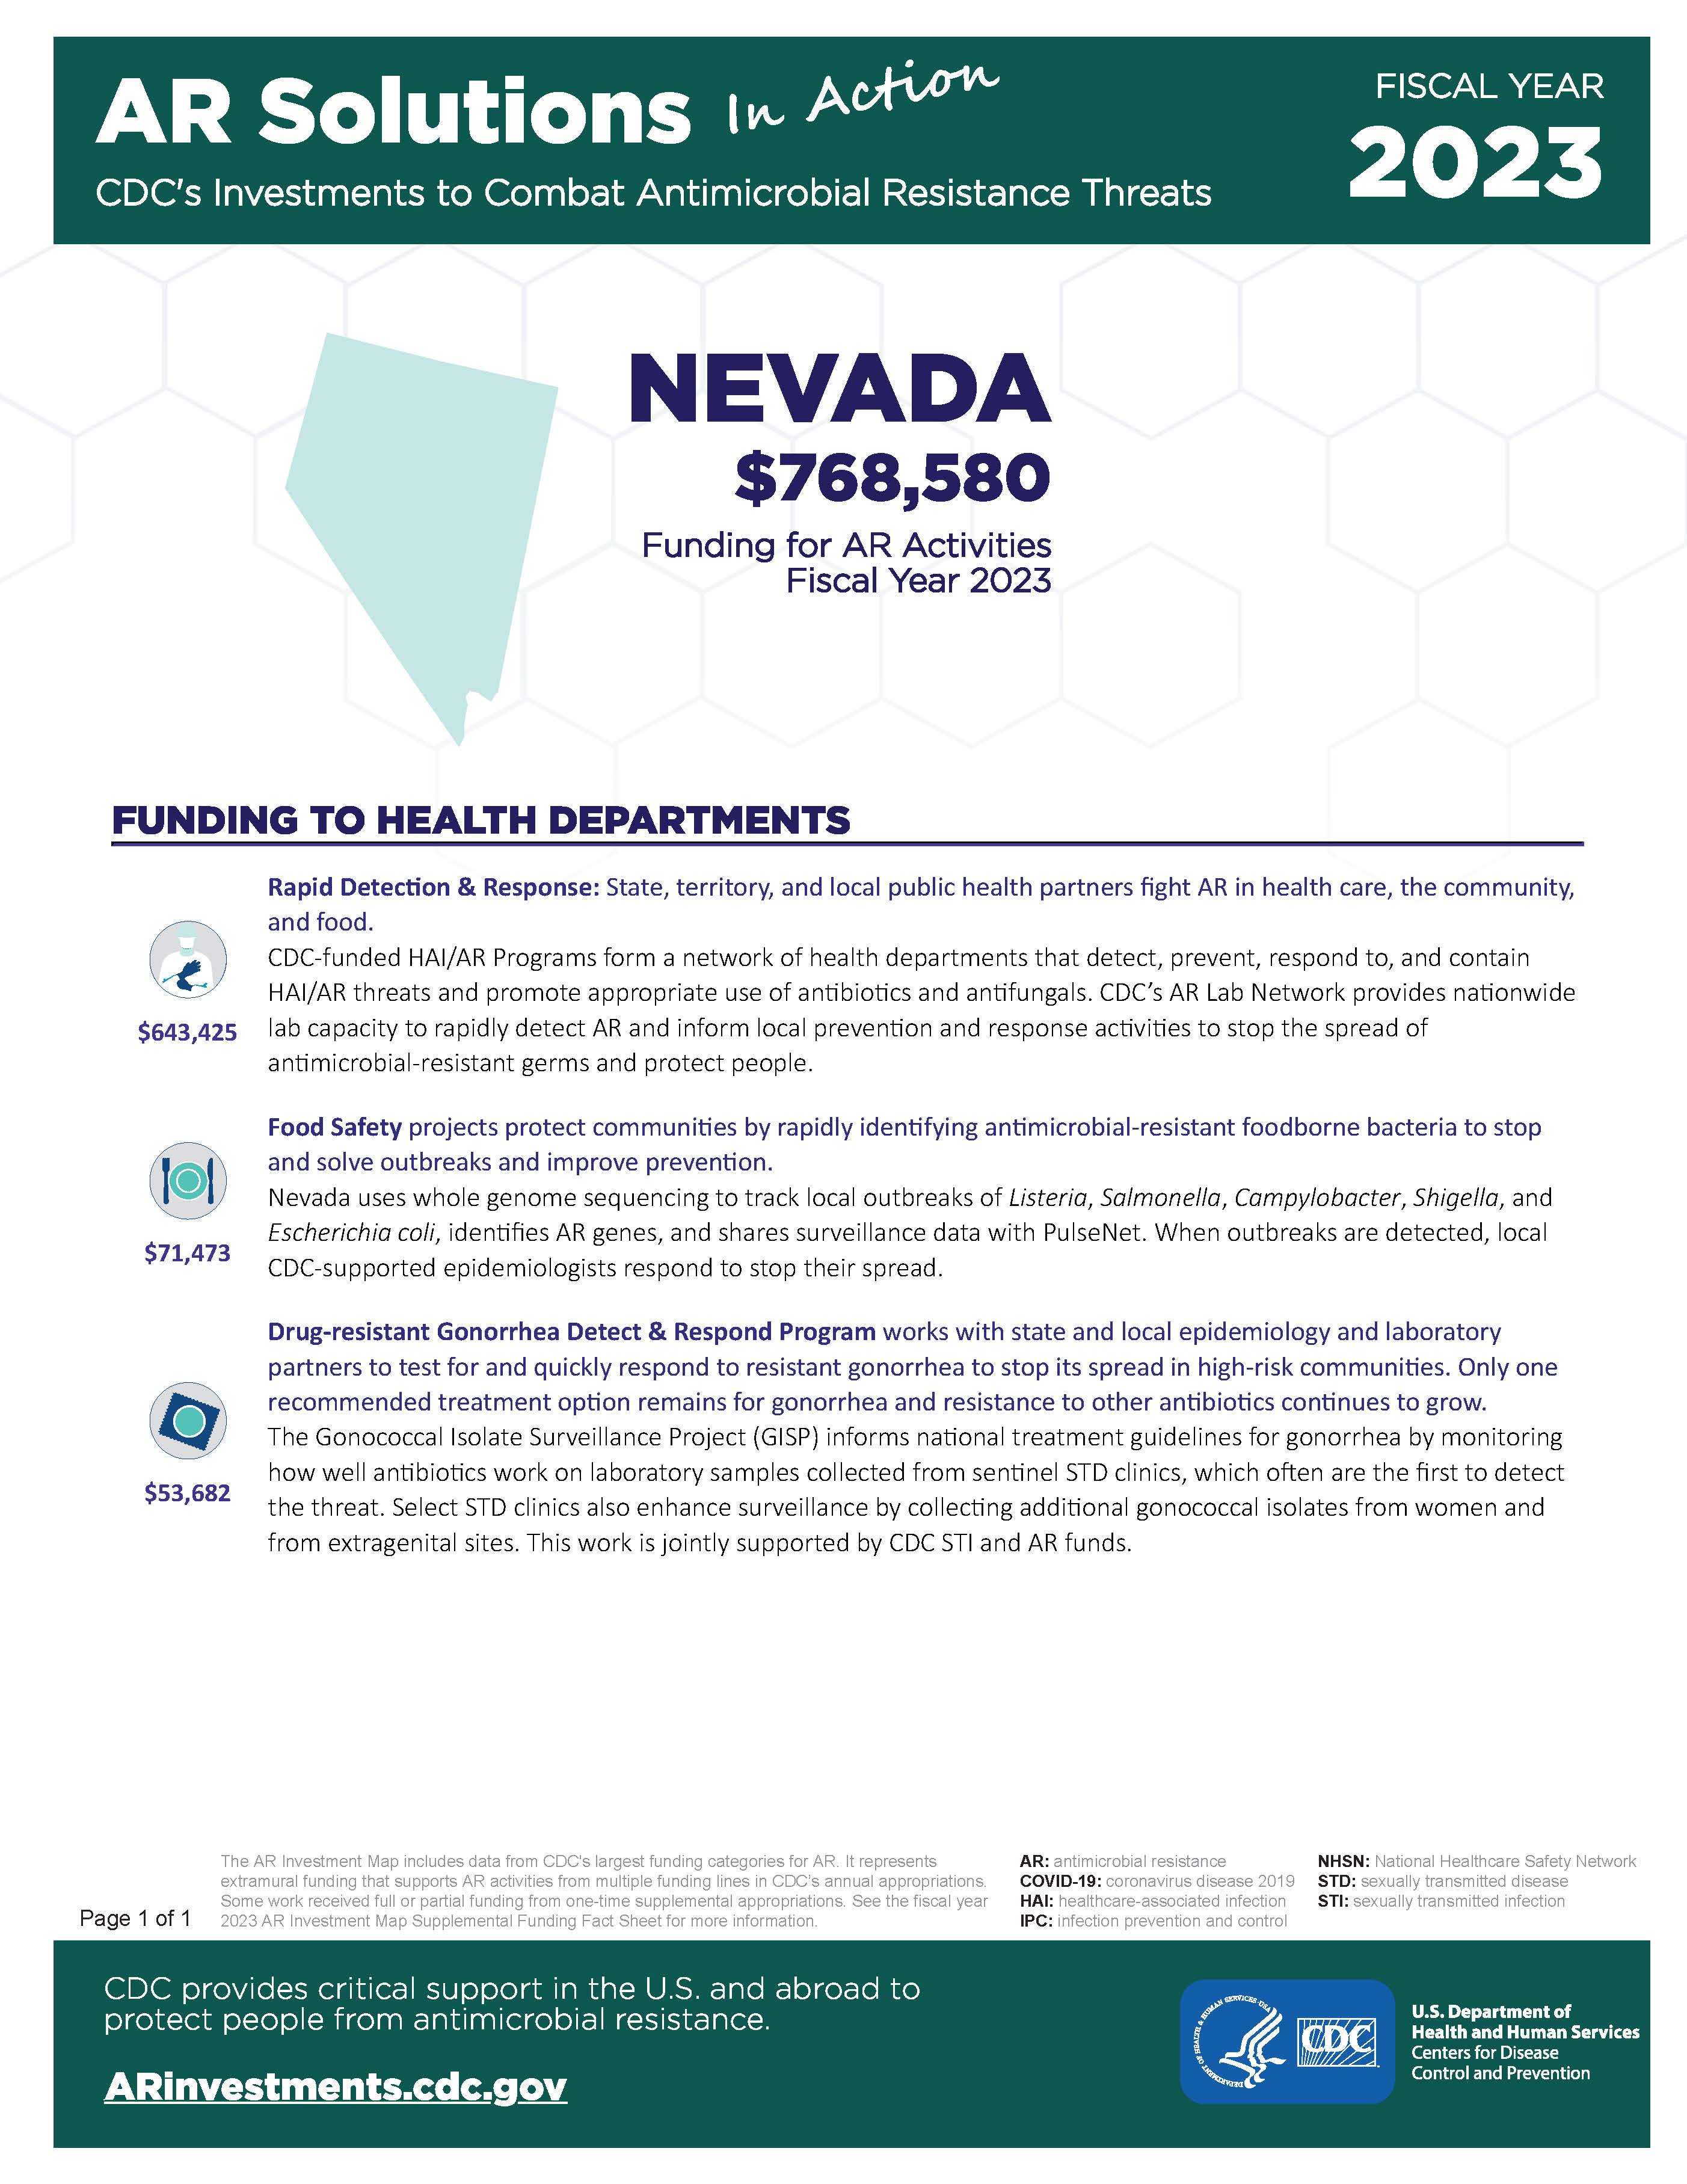 View Factsheet for Nevada